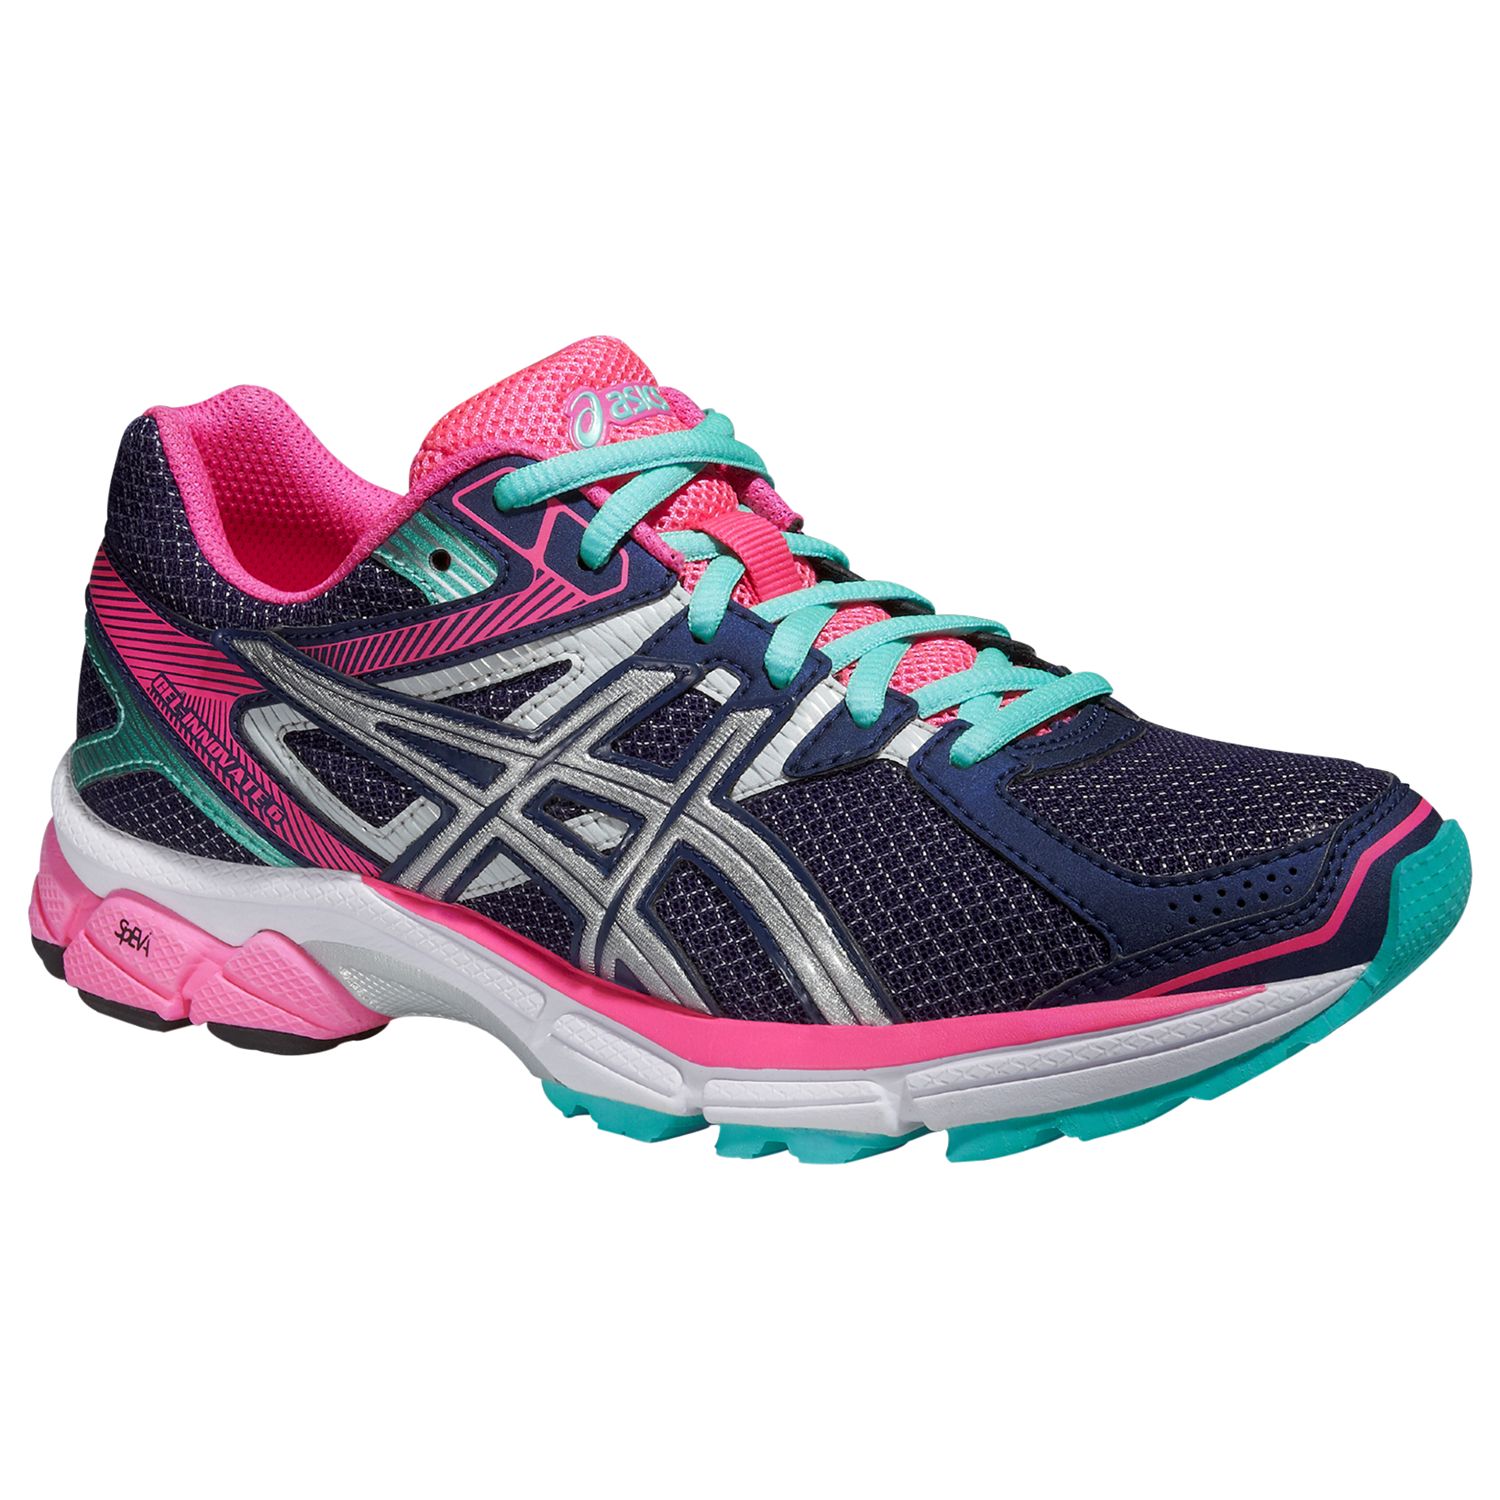 Asics Gel-Innovate 6 Women's Structured Running Shoes